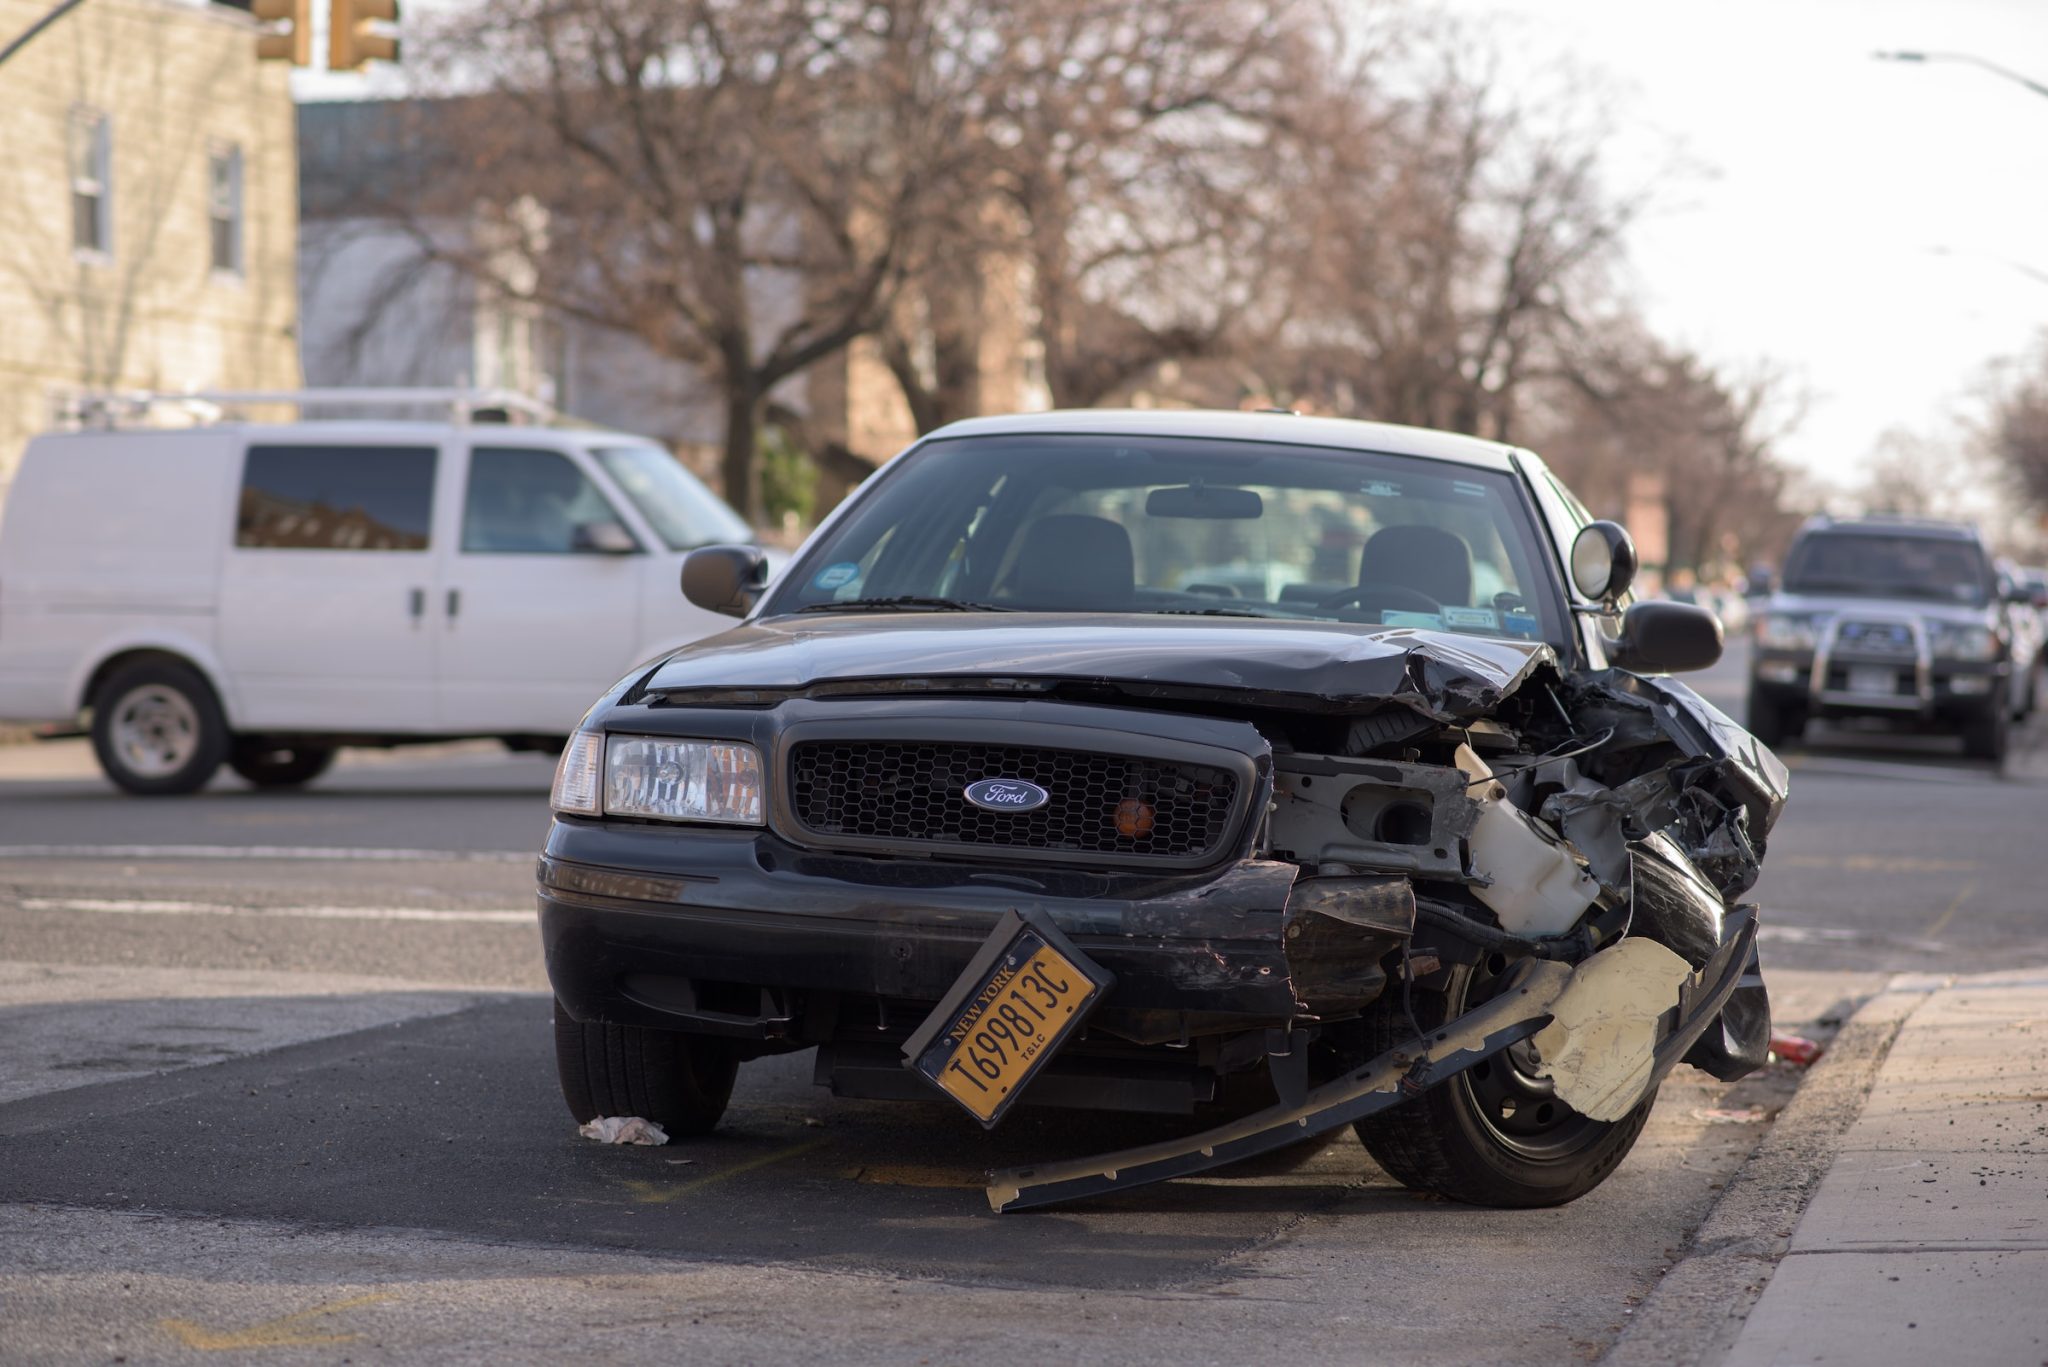 Traffic accidents that have serious consequences - how to deal with them